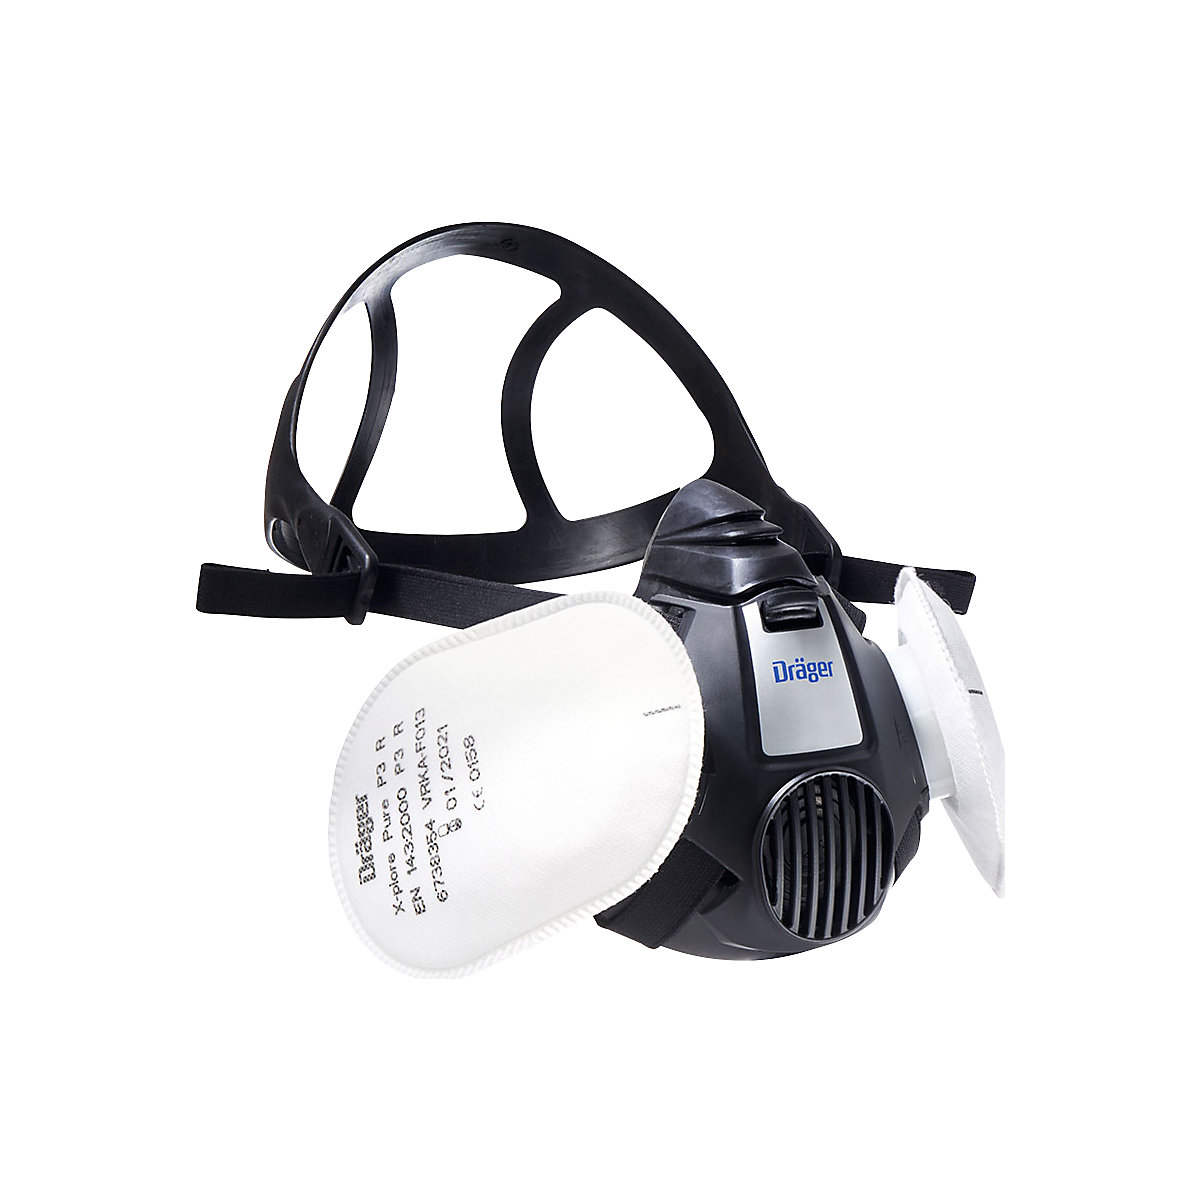 Set of X-plore® 3300 half masks incl. 2 filters for painting work – Dräger